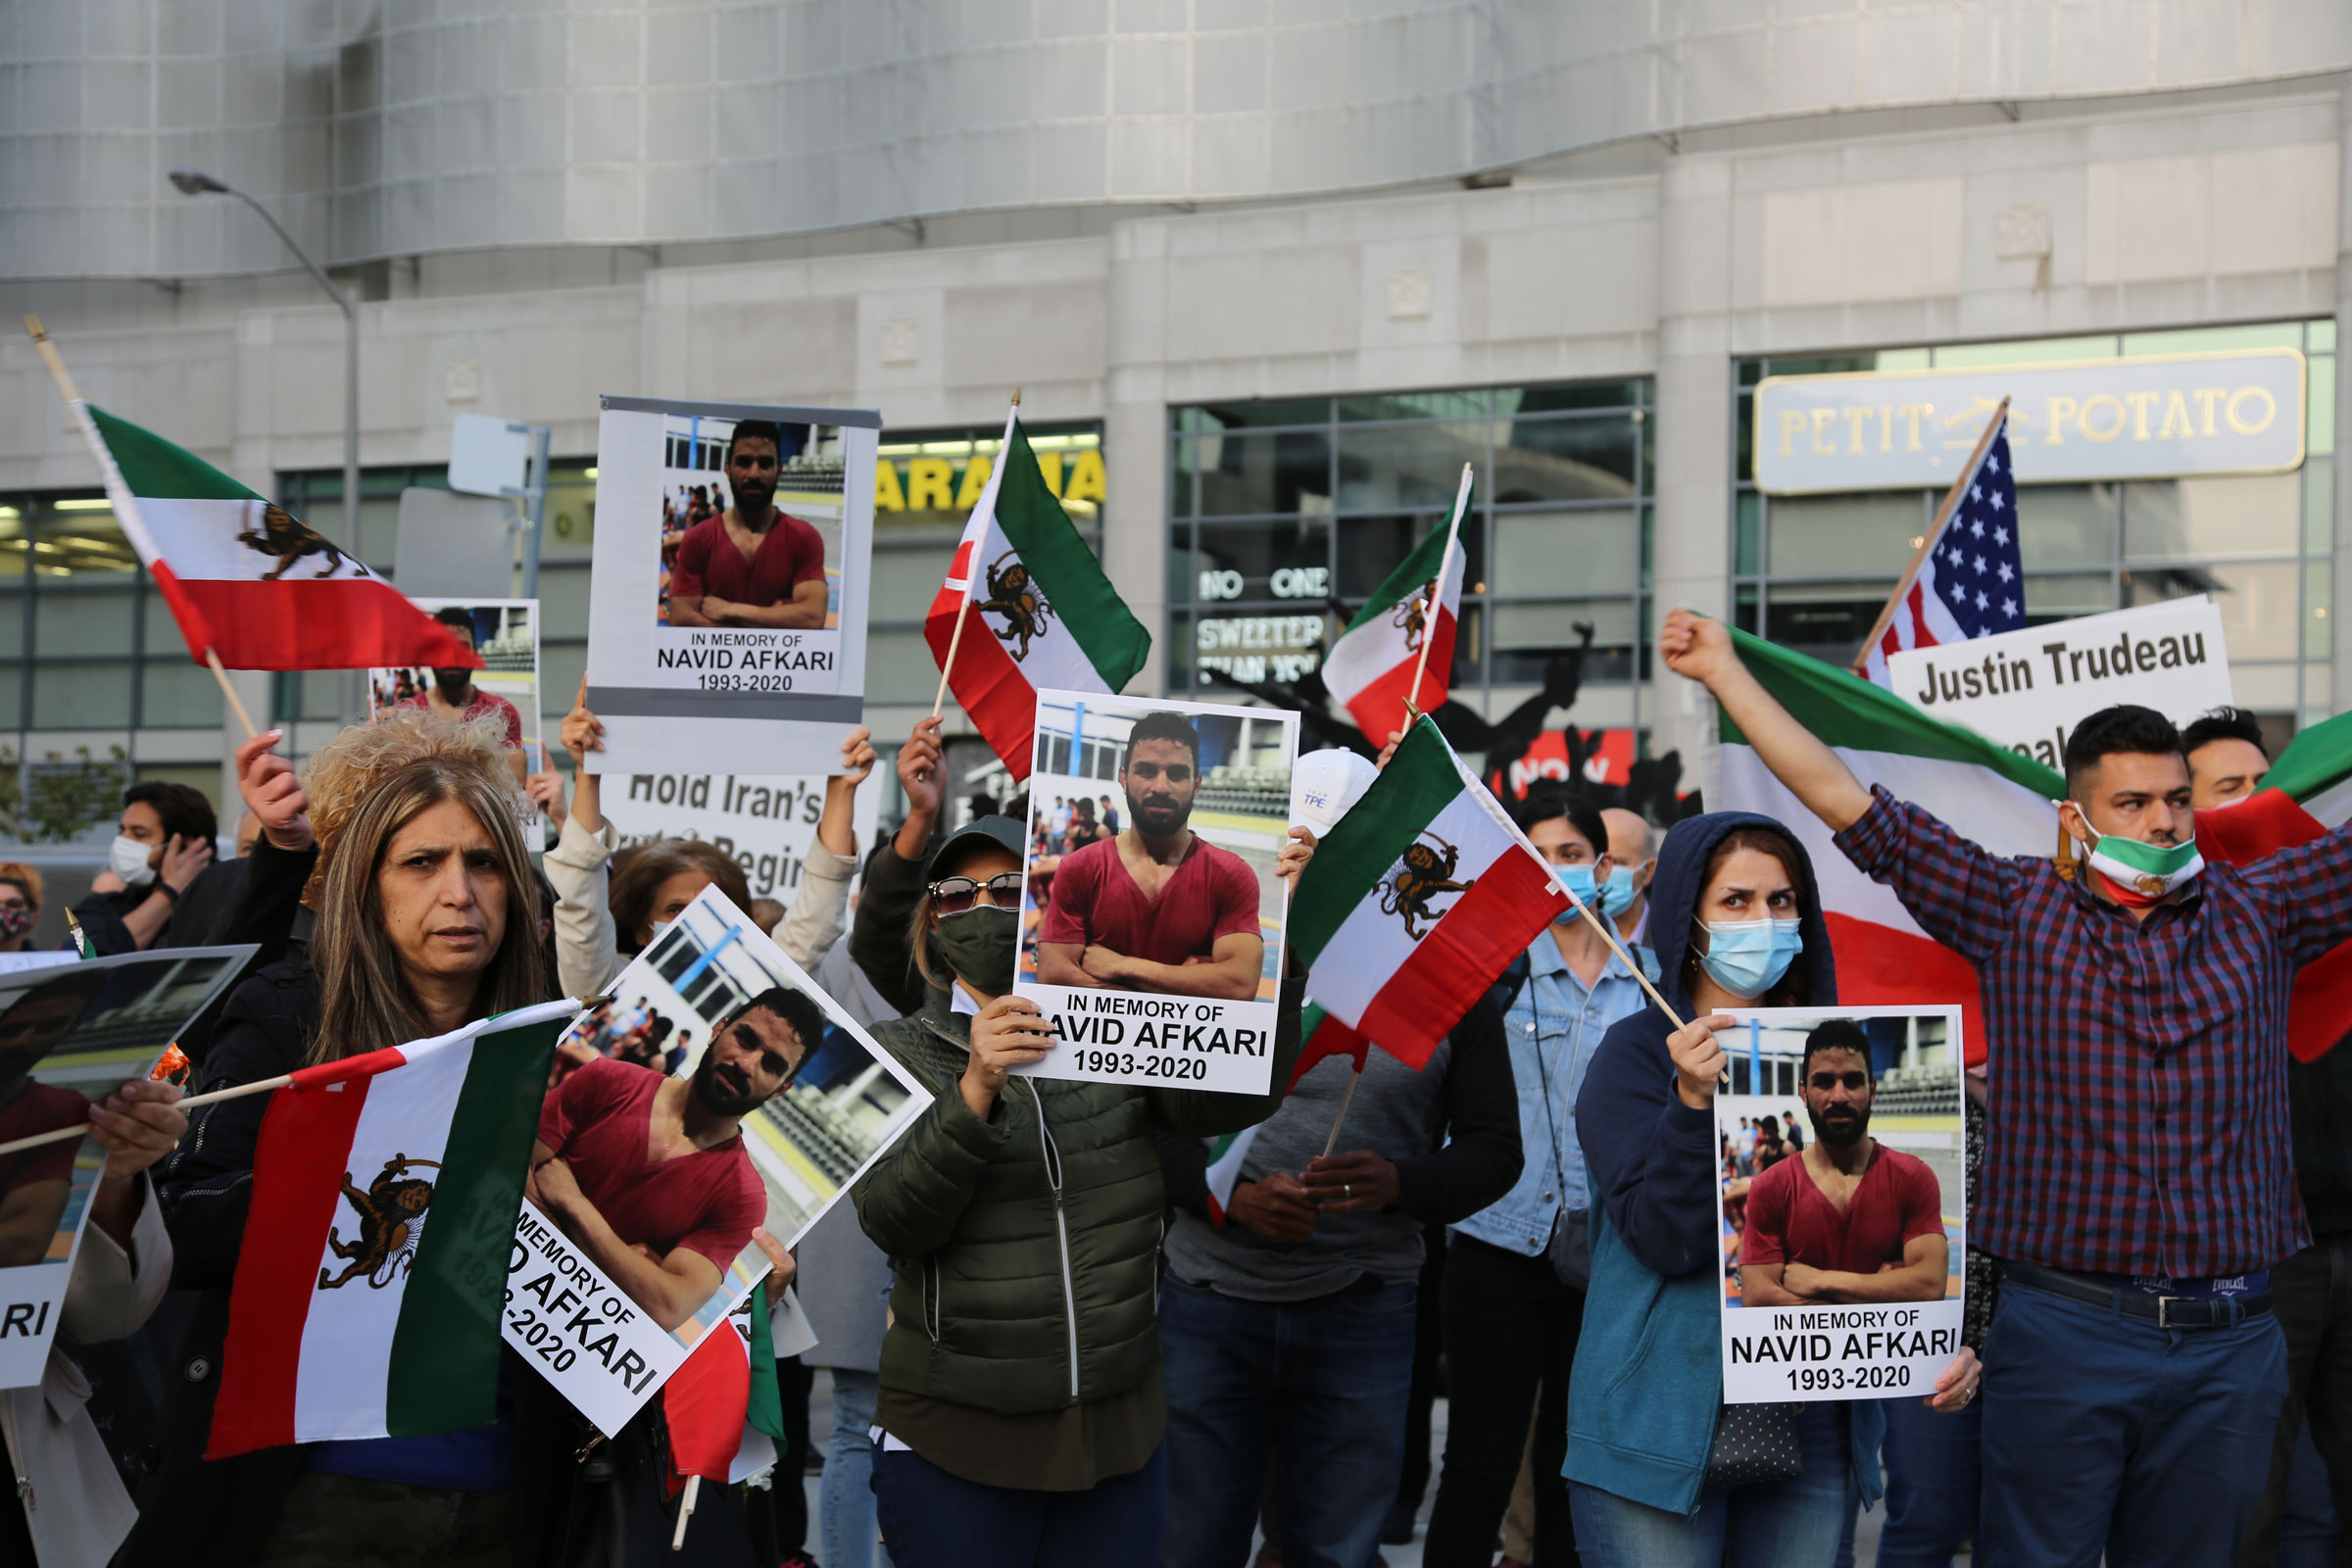 Iranians in Canada demonstrate against the execution of wrestler Navid Afkari by the Iranian regime, in Toronto, on Sept. 15, 2020. (Sayed Najafizada/NurPhoto)